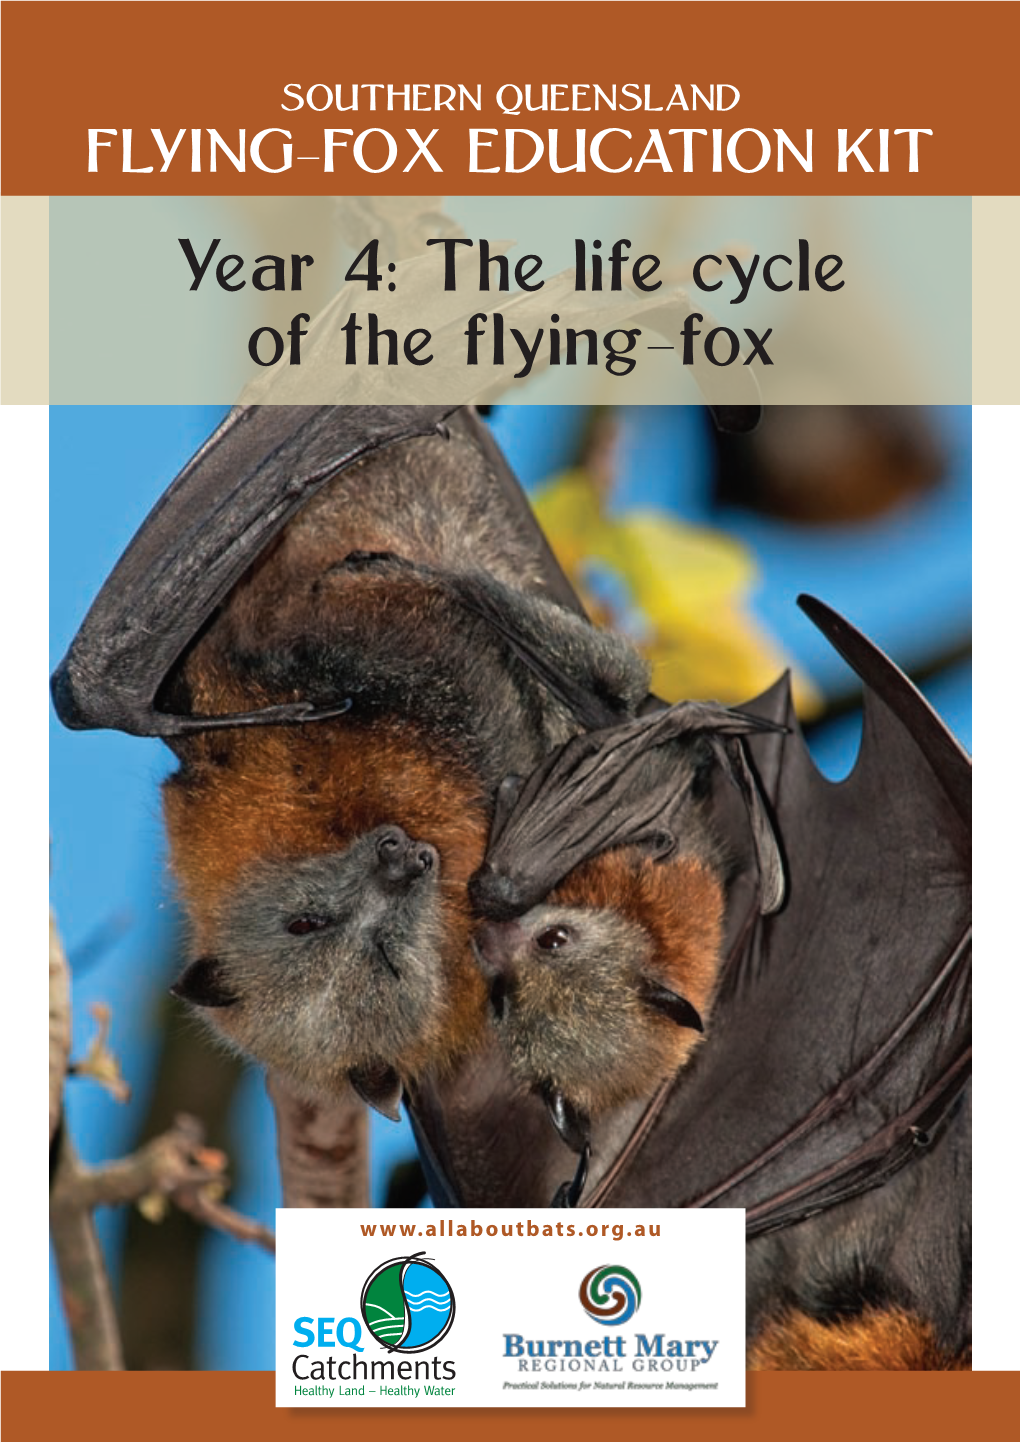 The Life Cycle of the Flying-Fox